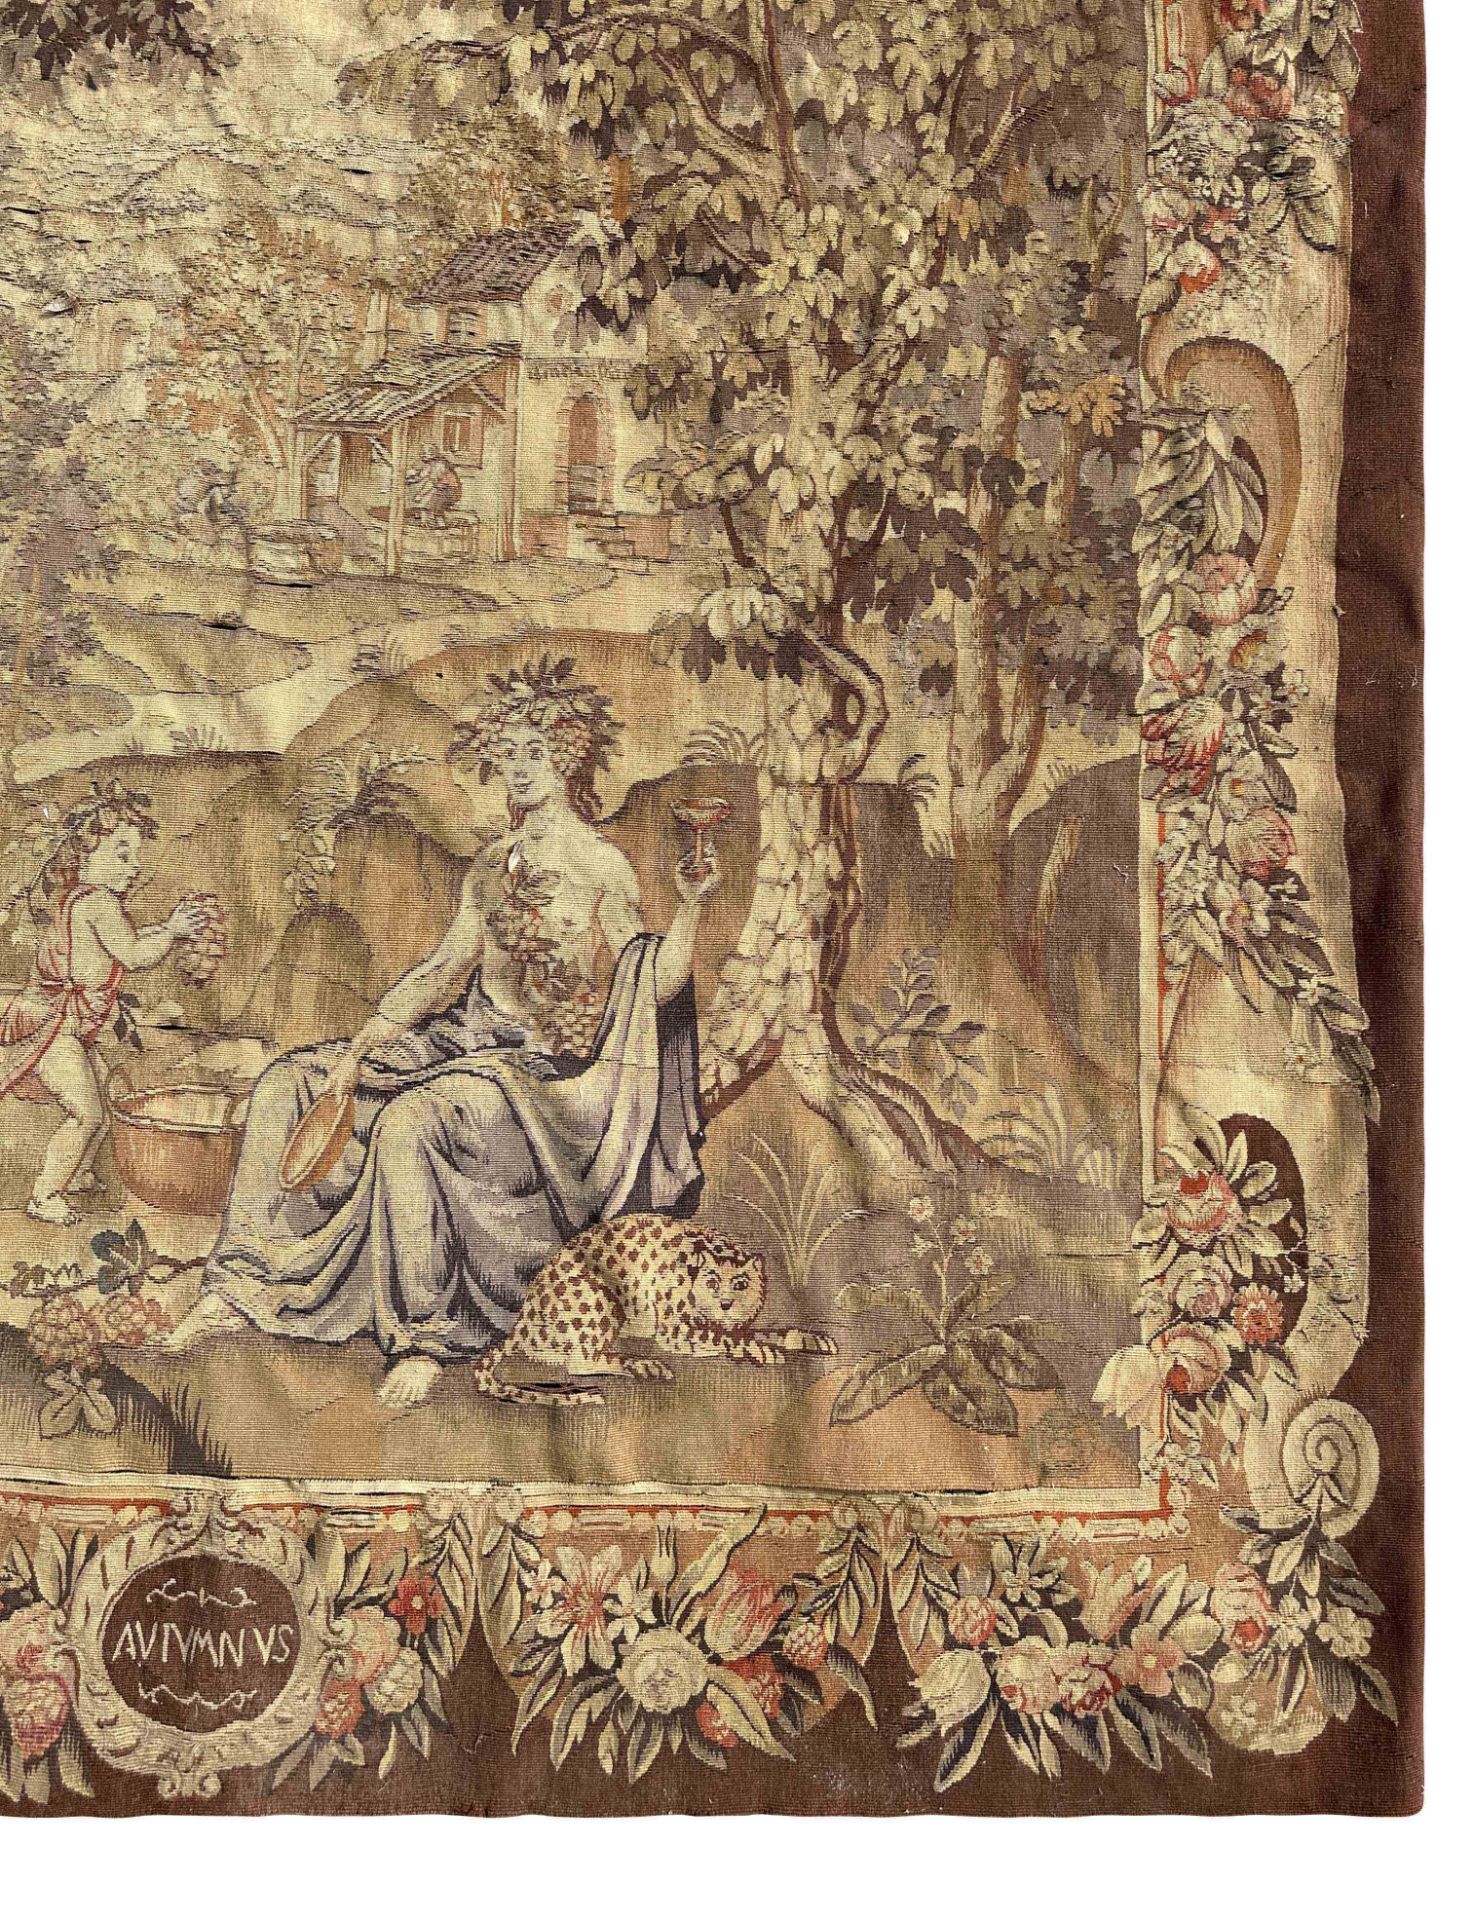 Tapestry. 19th century. Youthful Bacchus. - Image 3 of 12